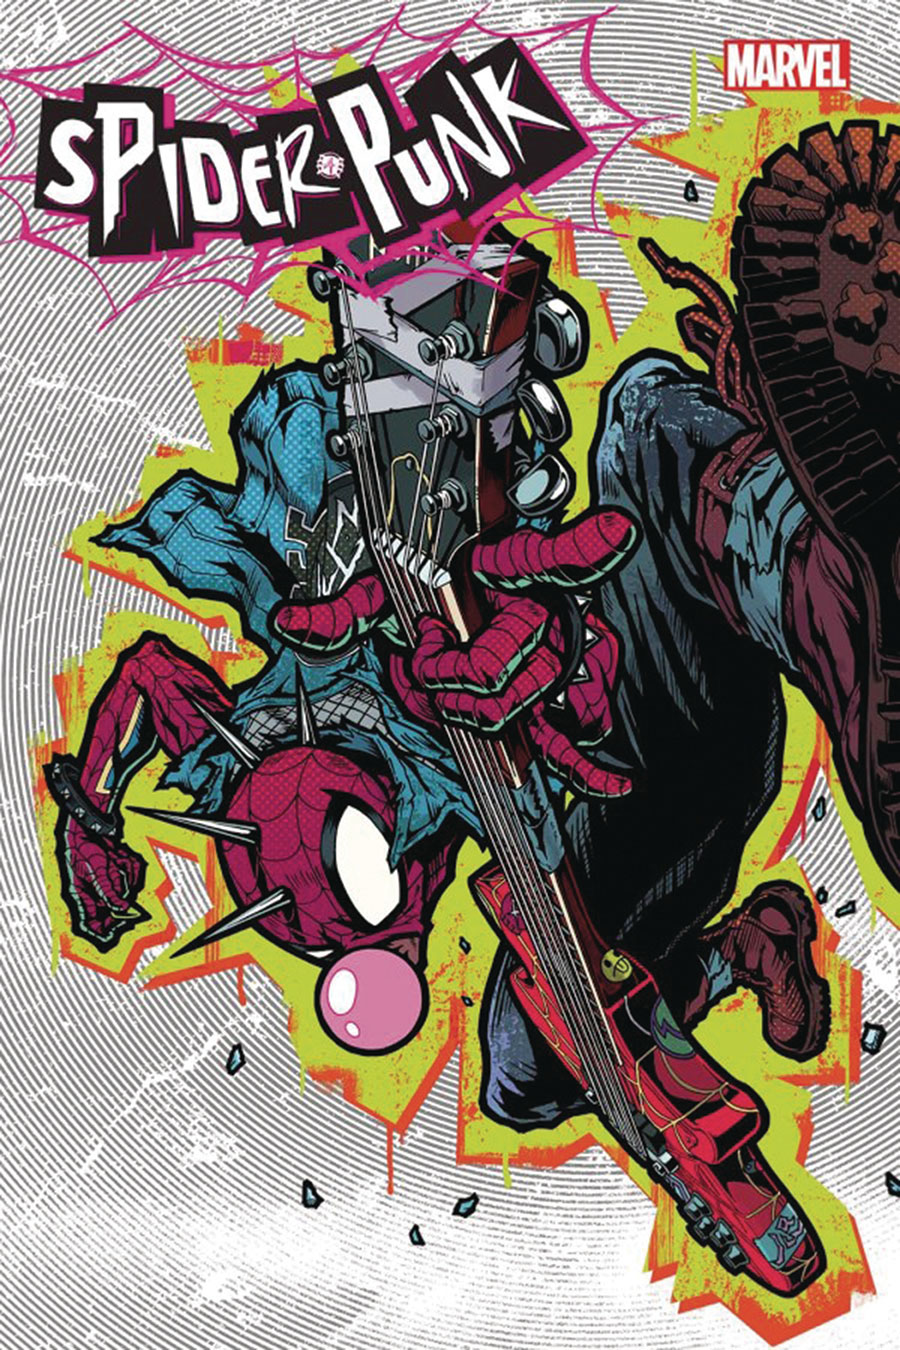 Spider-Punk Arms Race #1 Cover J DF Signed By Cody Ziglar